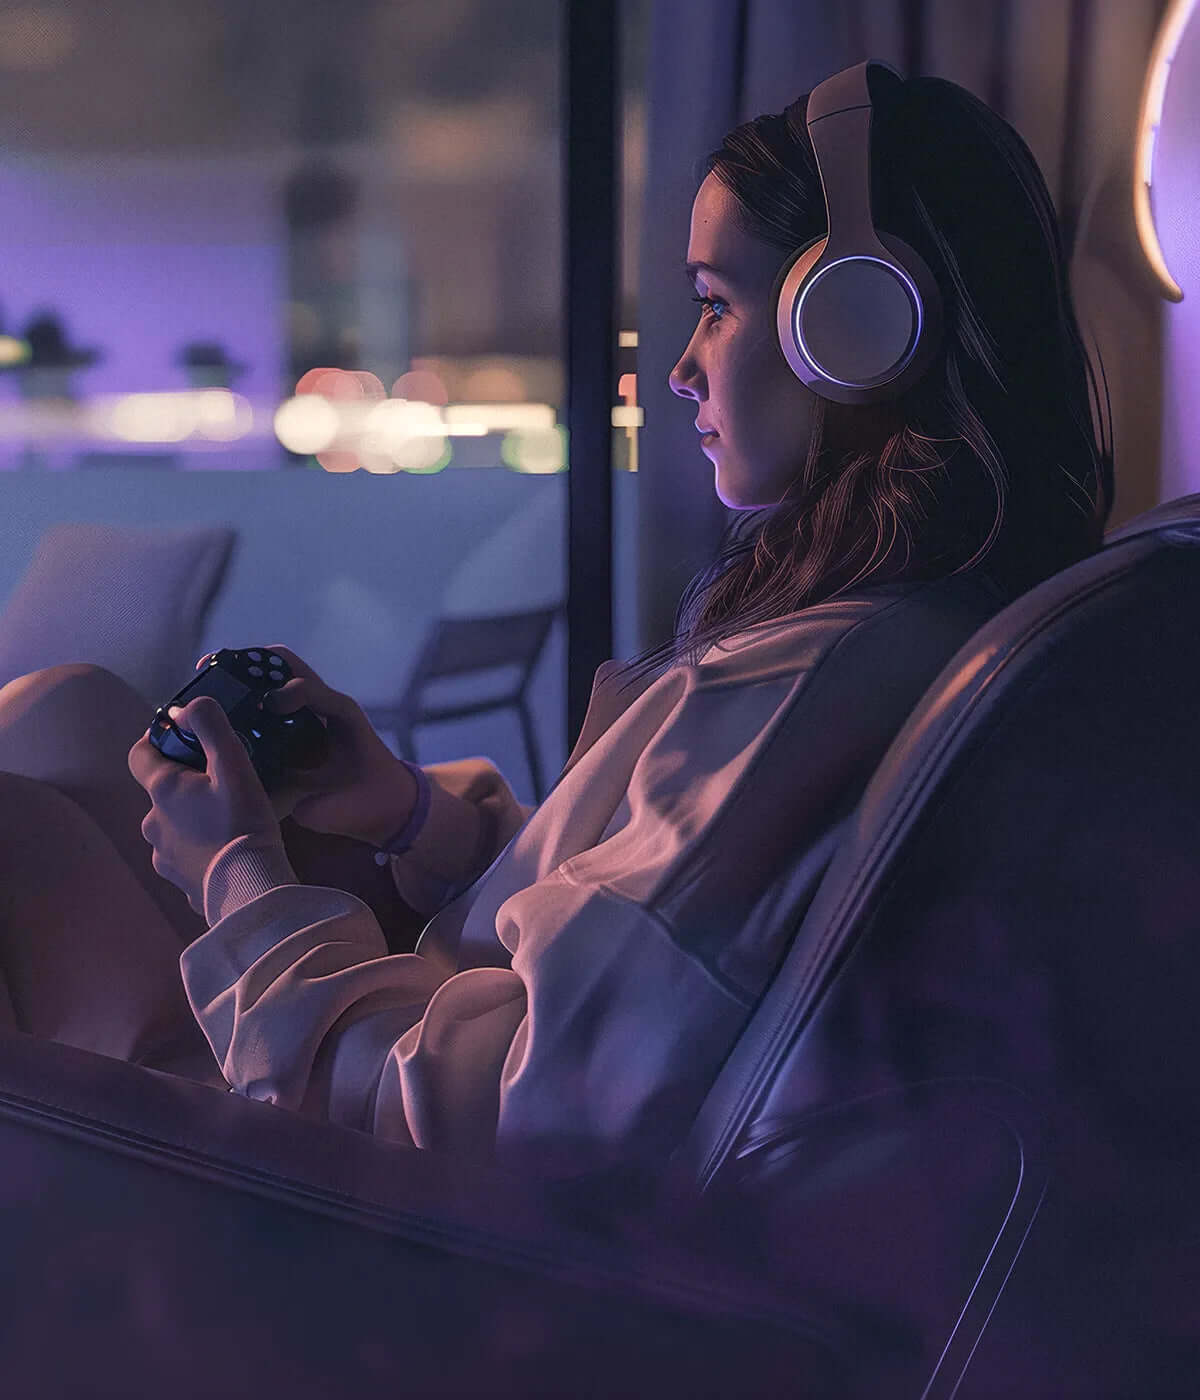 A yound woman playing video games.